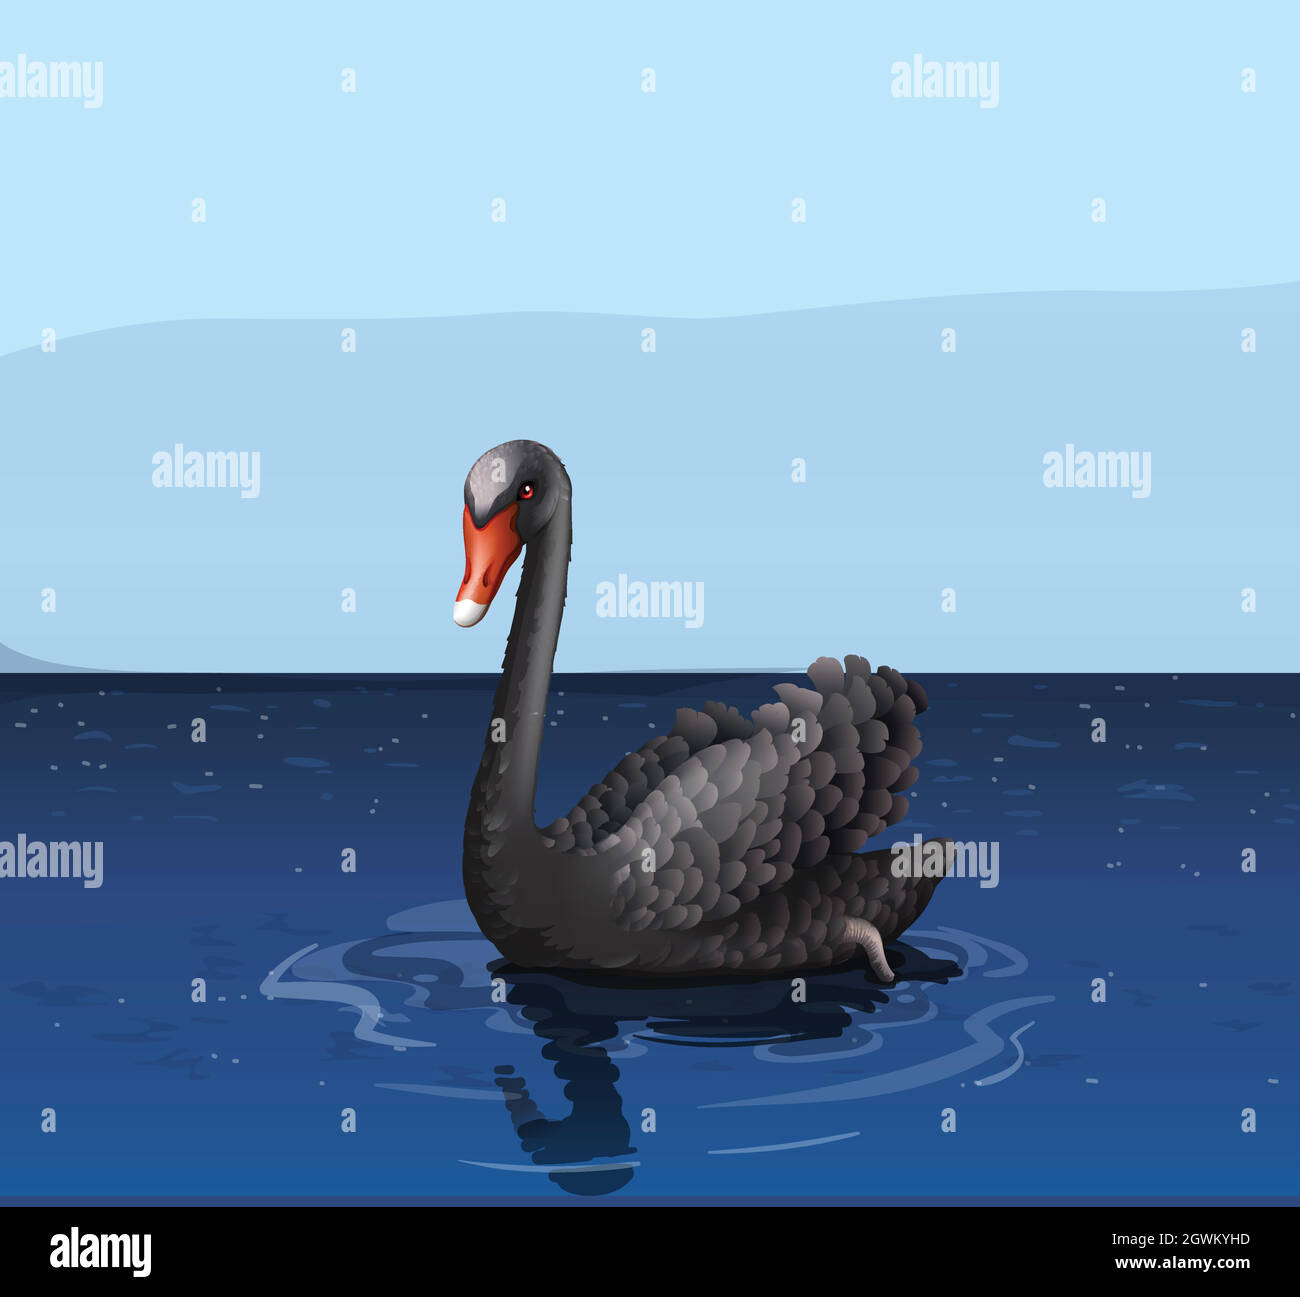 Black swan picture Stock Vector Images - Alamy